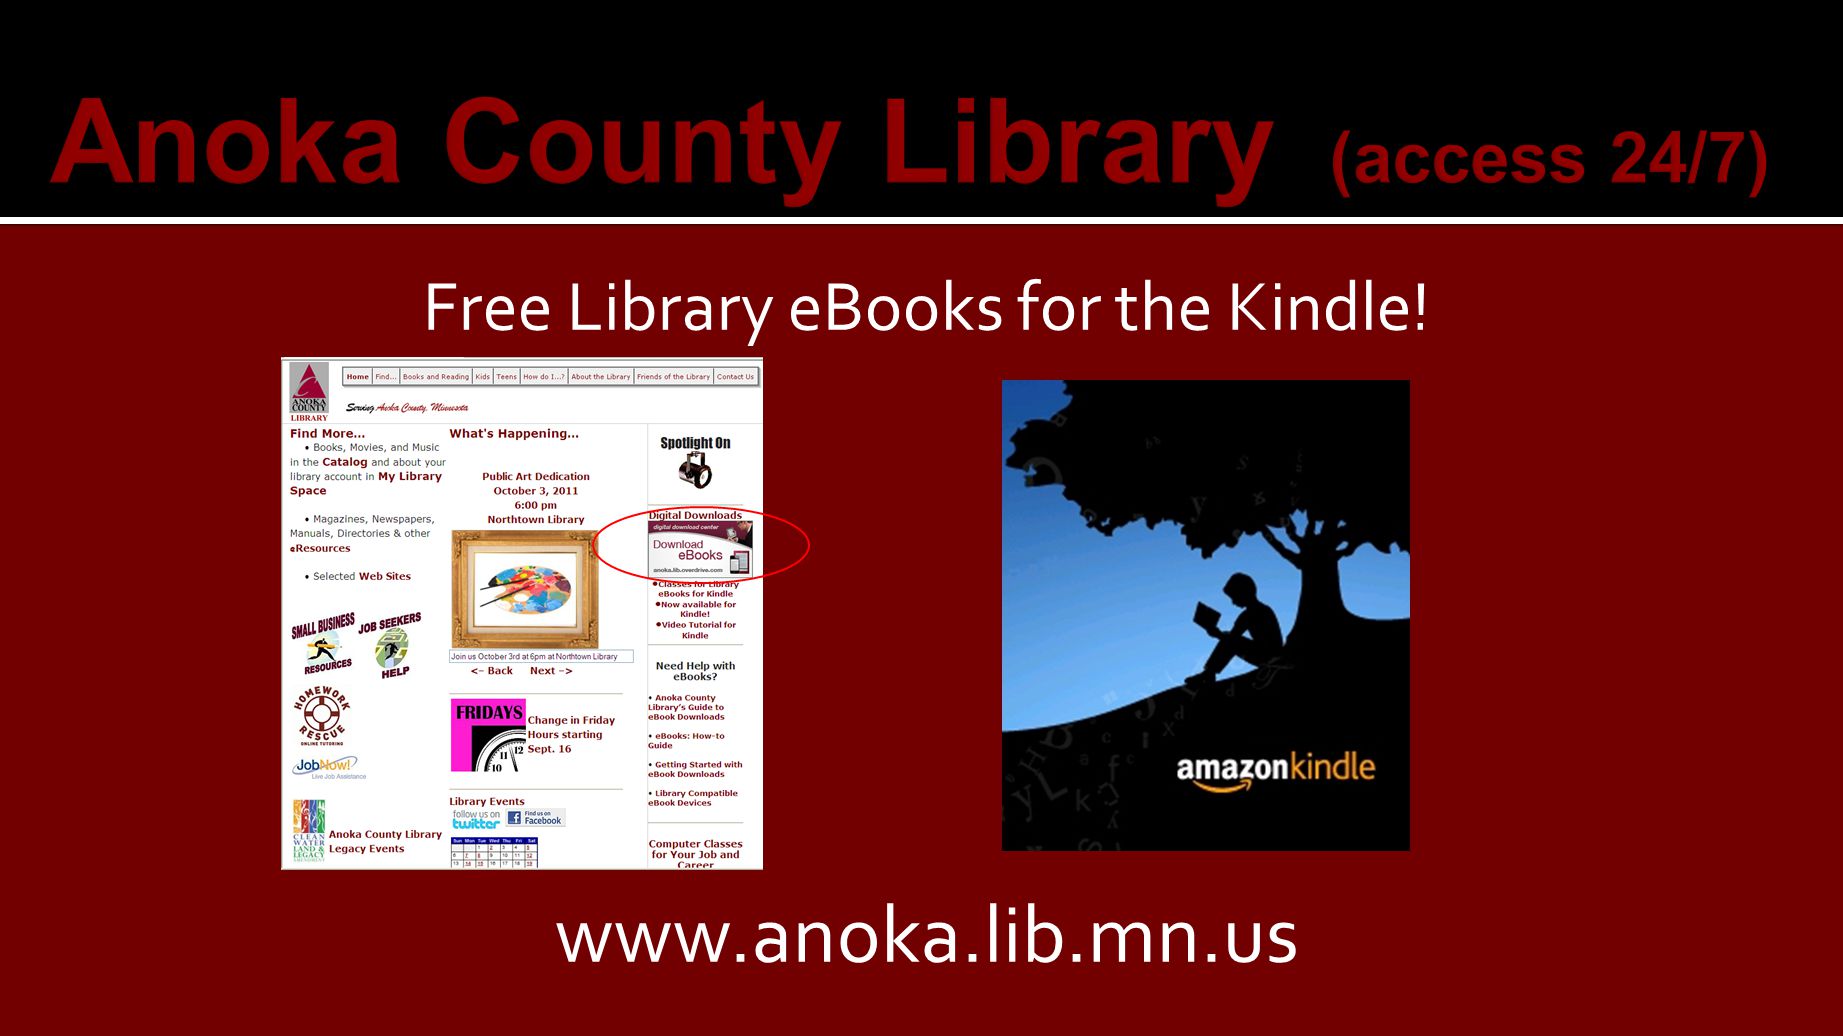 Anoka County Library (access 24/7) Free Library eBooks for the Kindle!